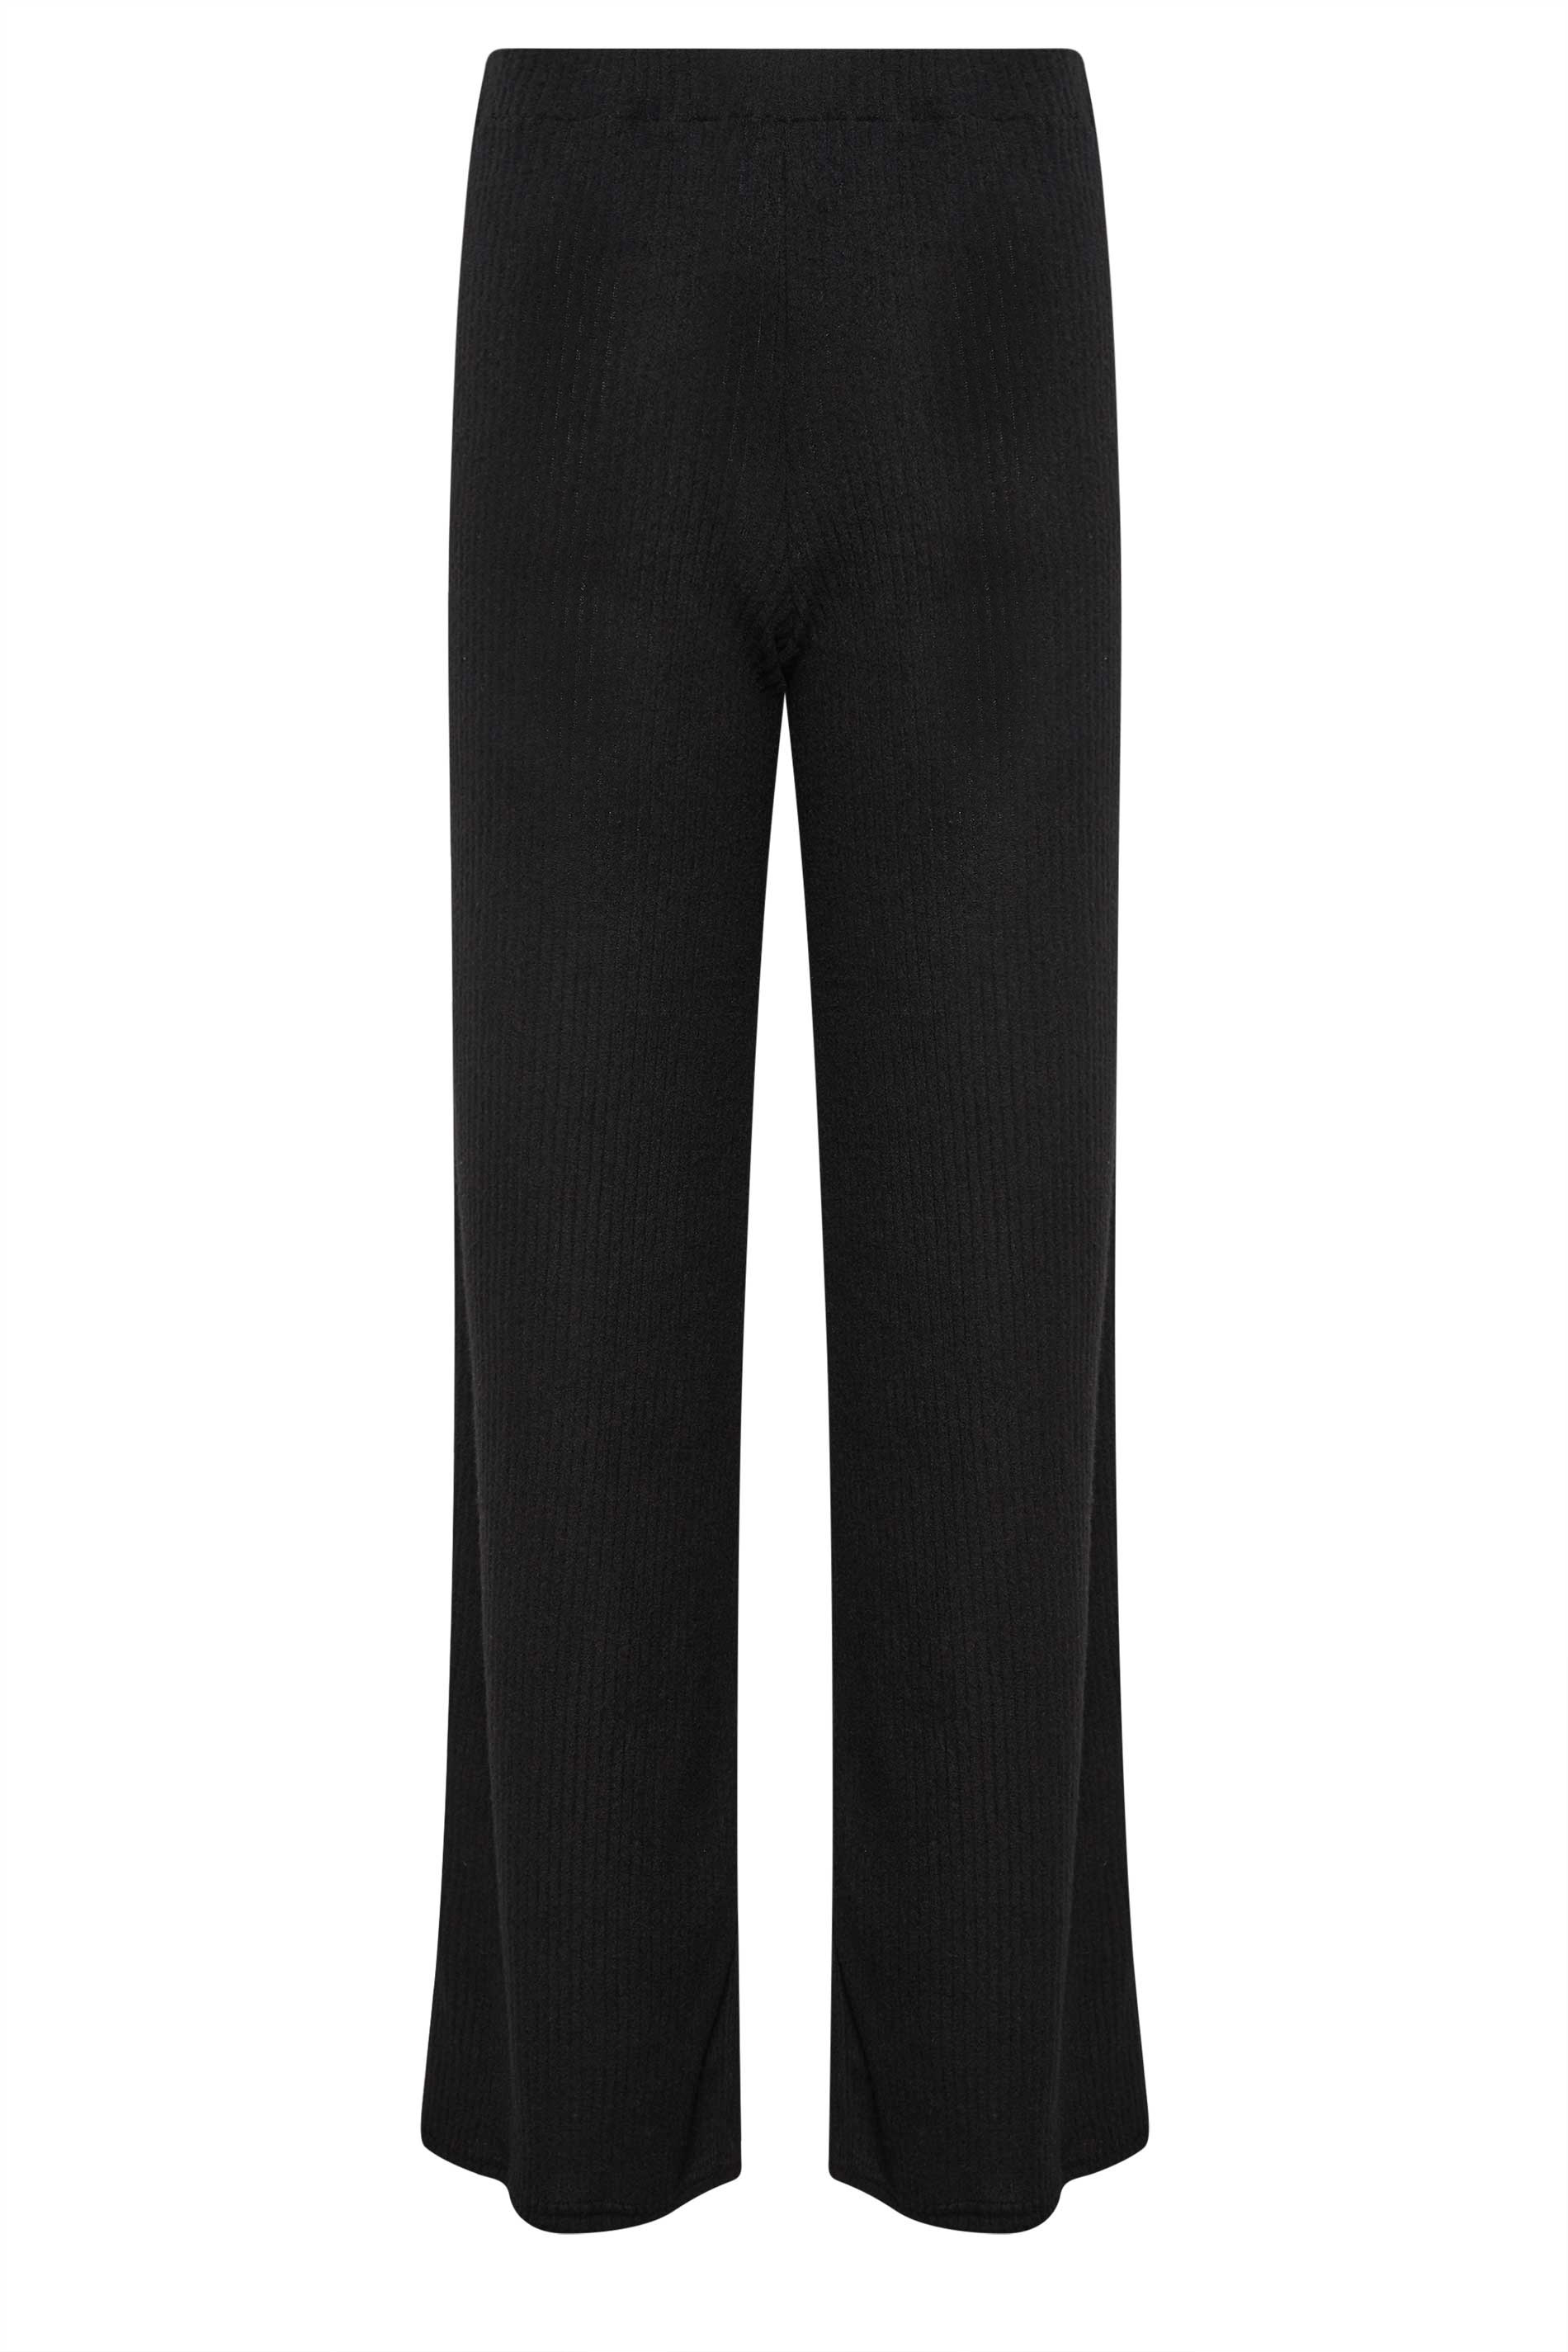 LTS Tall Black Ribbed Wide Leg Knitted Trousers| Long Tall Sally | Long ...